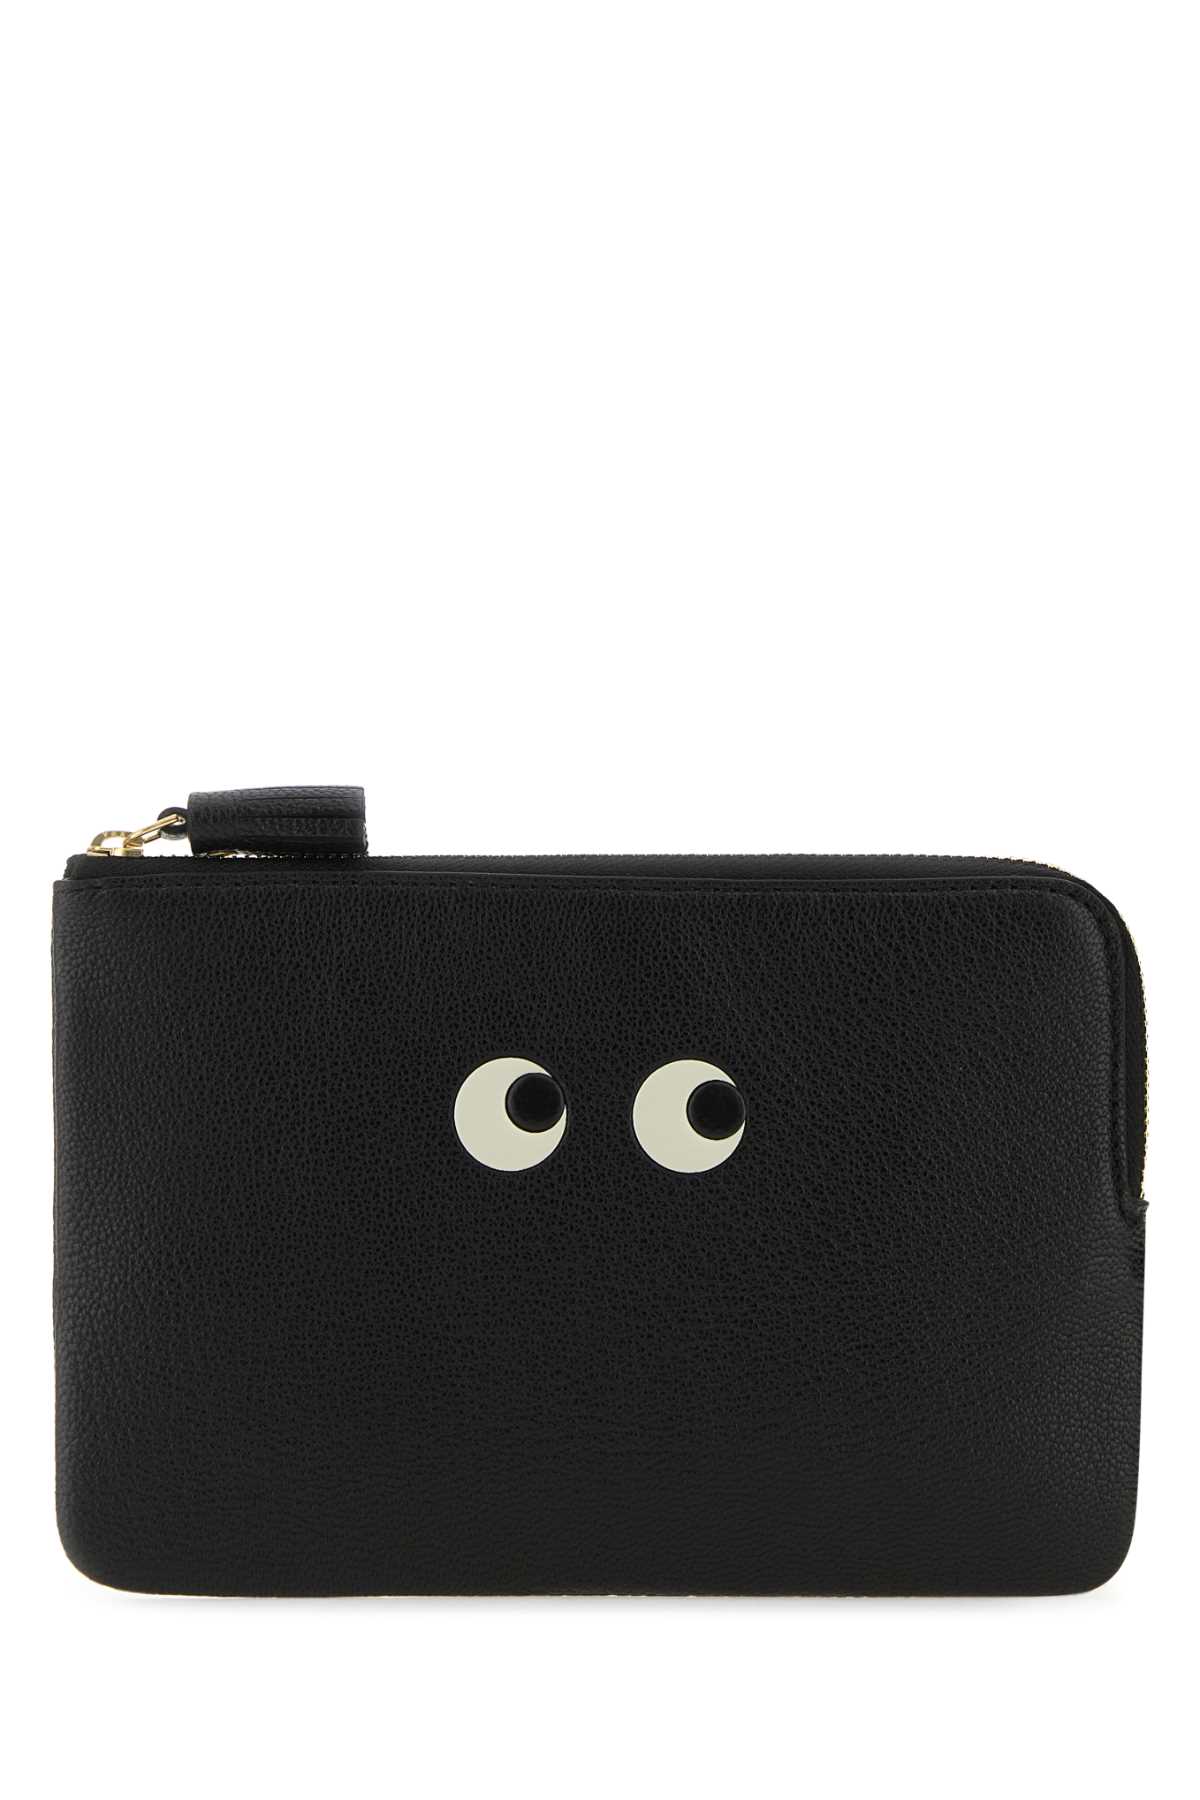 Black Leather Loose Pocket Eyes Pouch